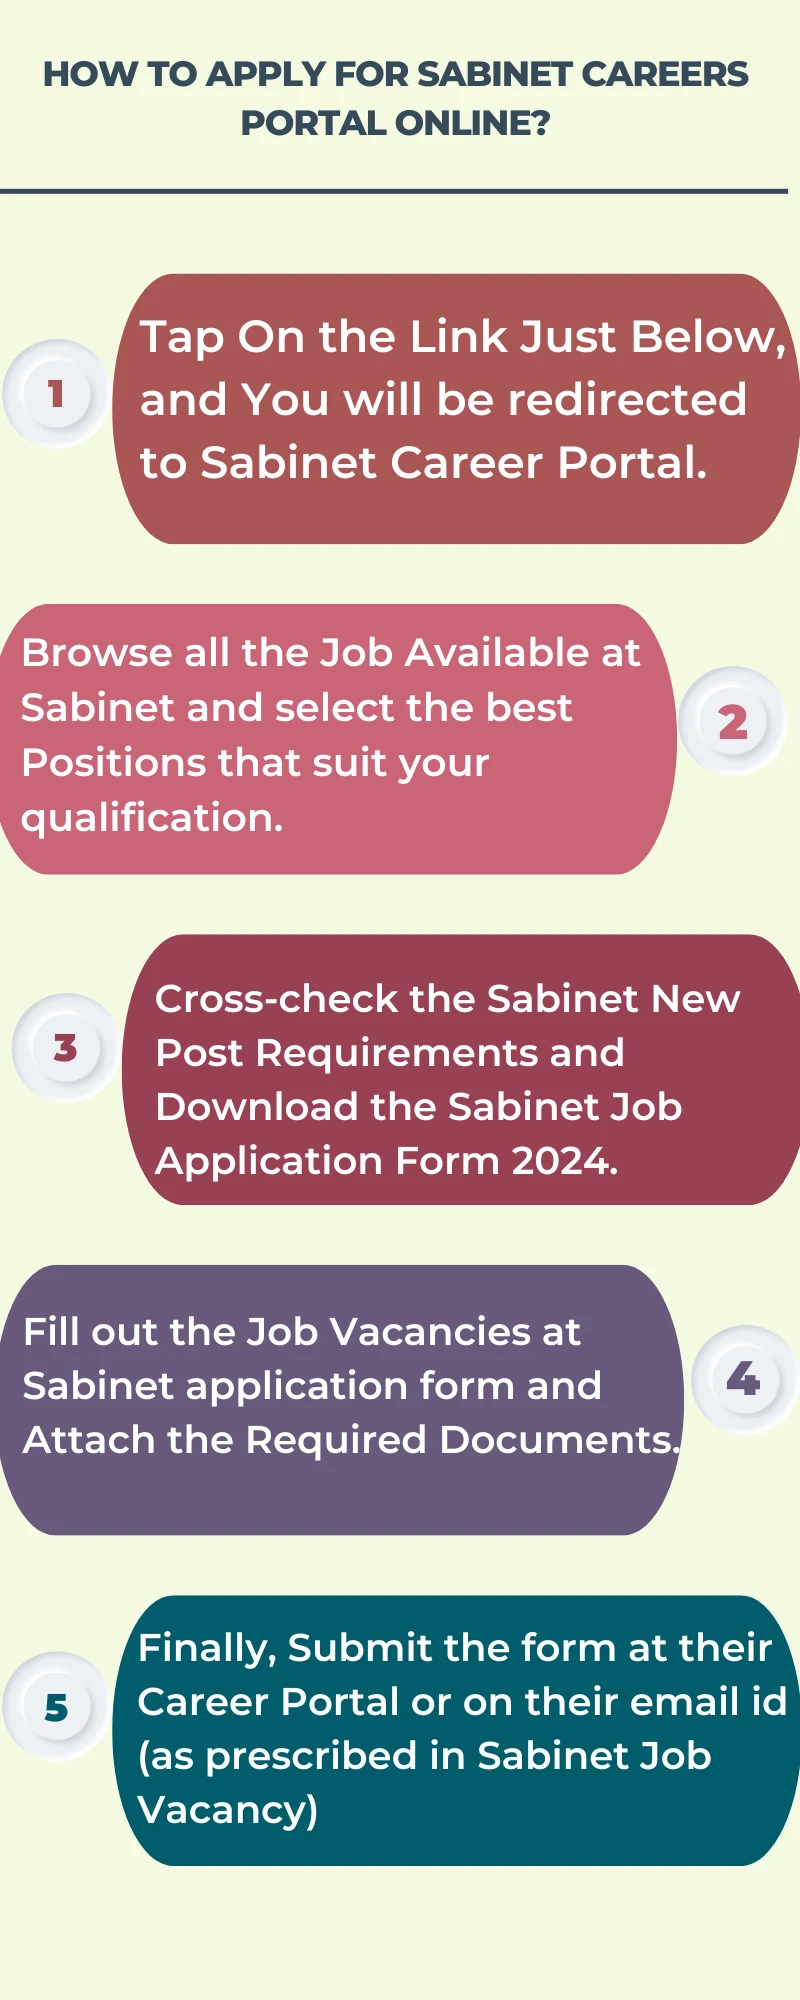 How To Apply for Sabinet Careers Portal Online?